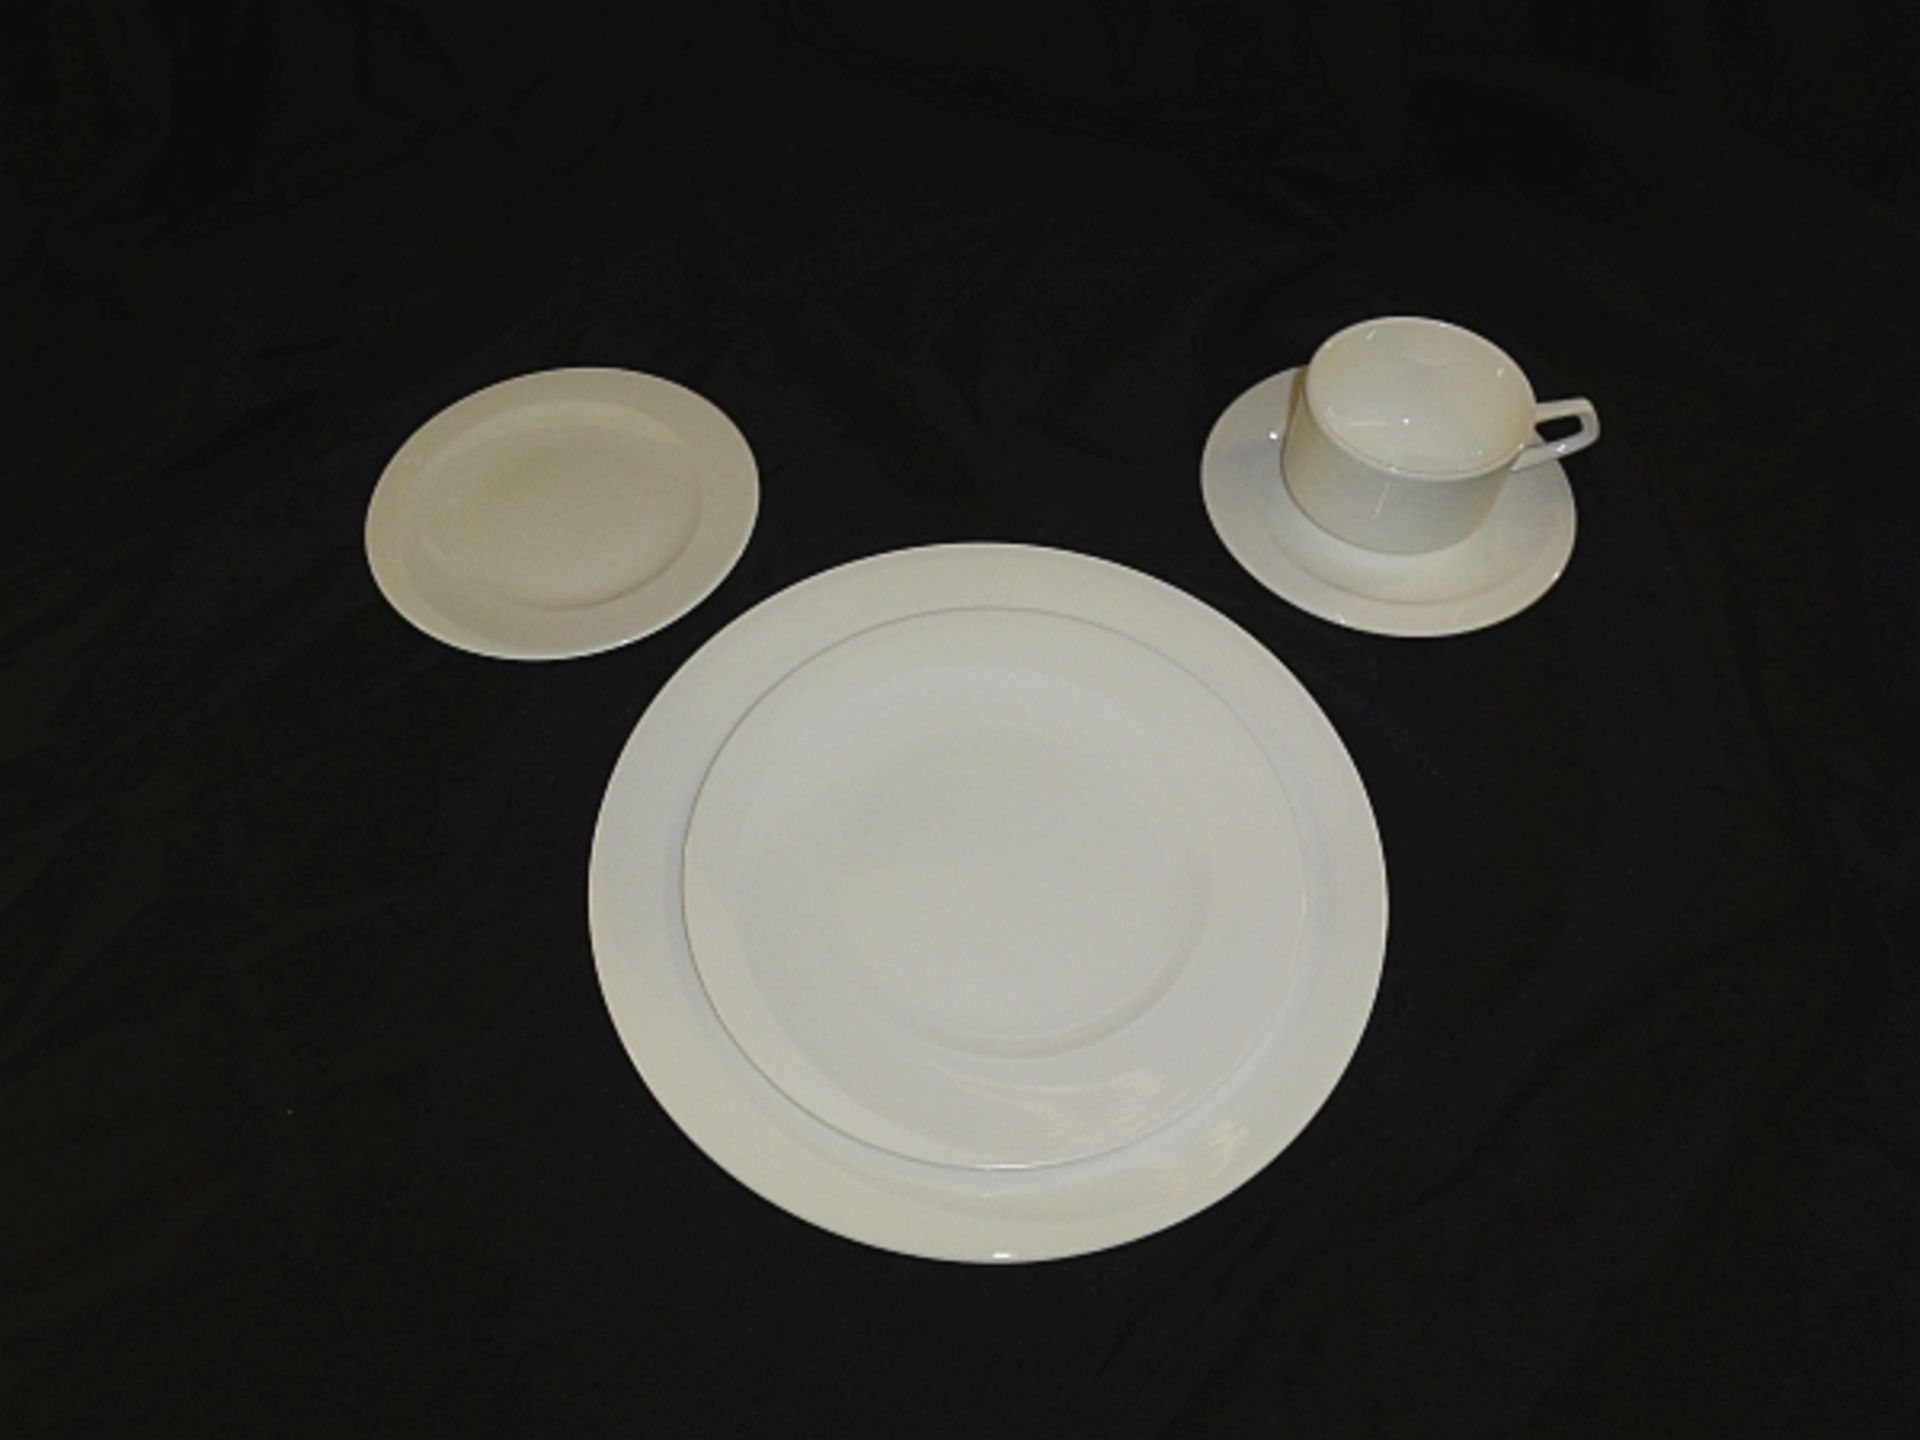 LOT OF 260 WHITE 10.75" DINNER PLATE- FORTESSA- LOT COMES IN 11 MICROWIRE CRATES BILLED @ $18 EA. - Image 2 of 2